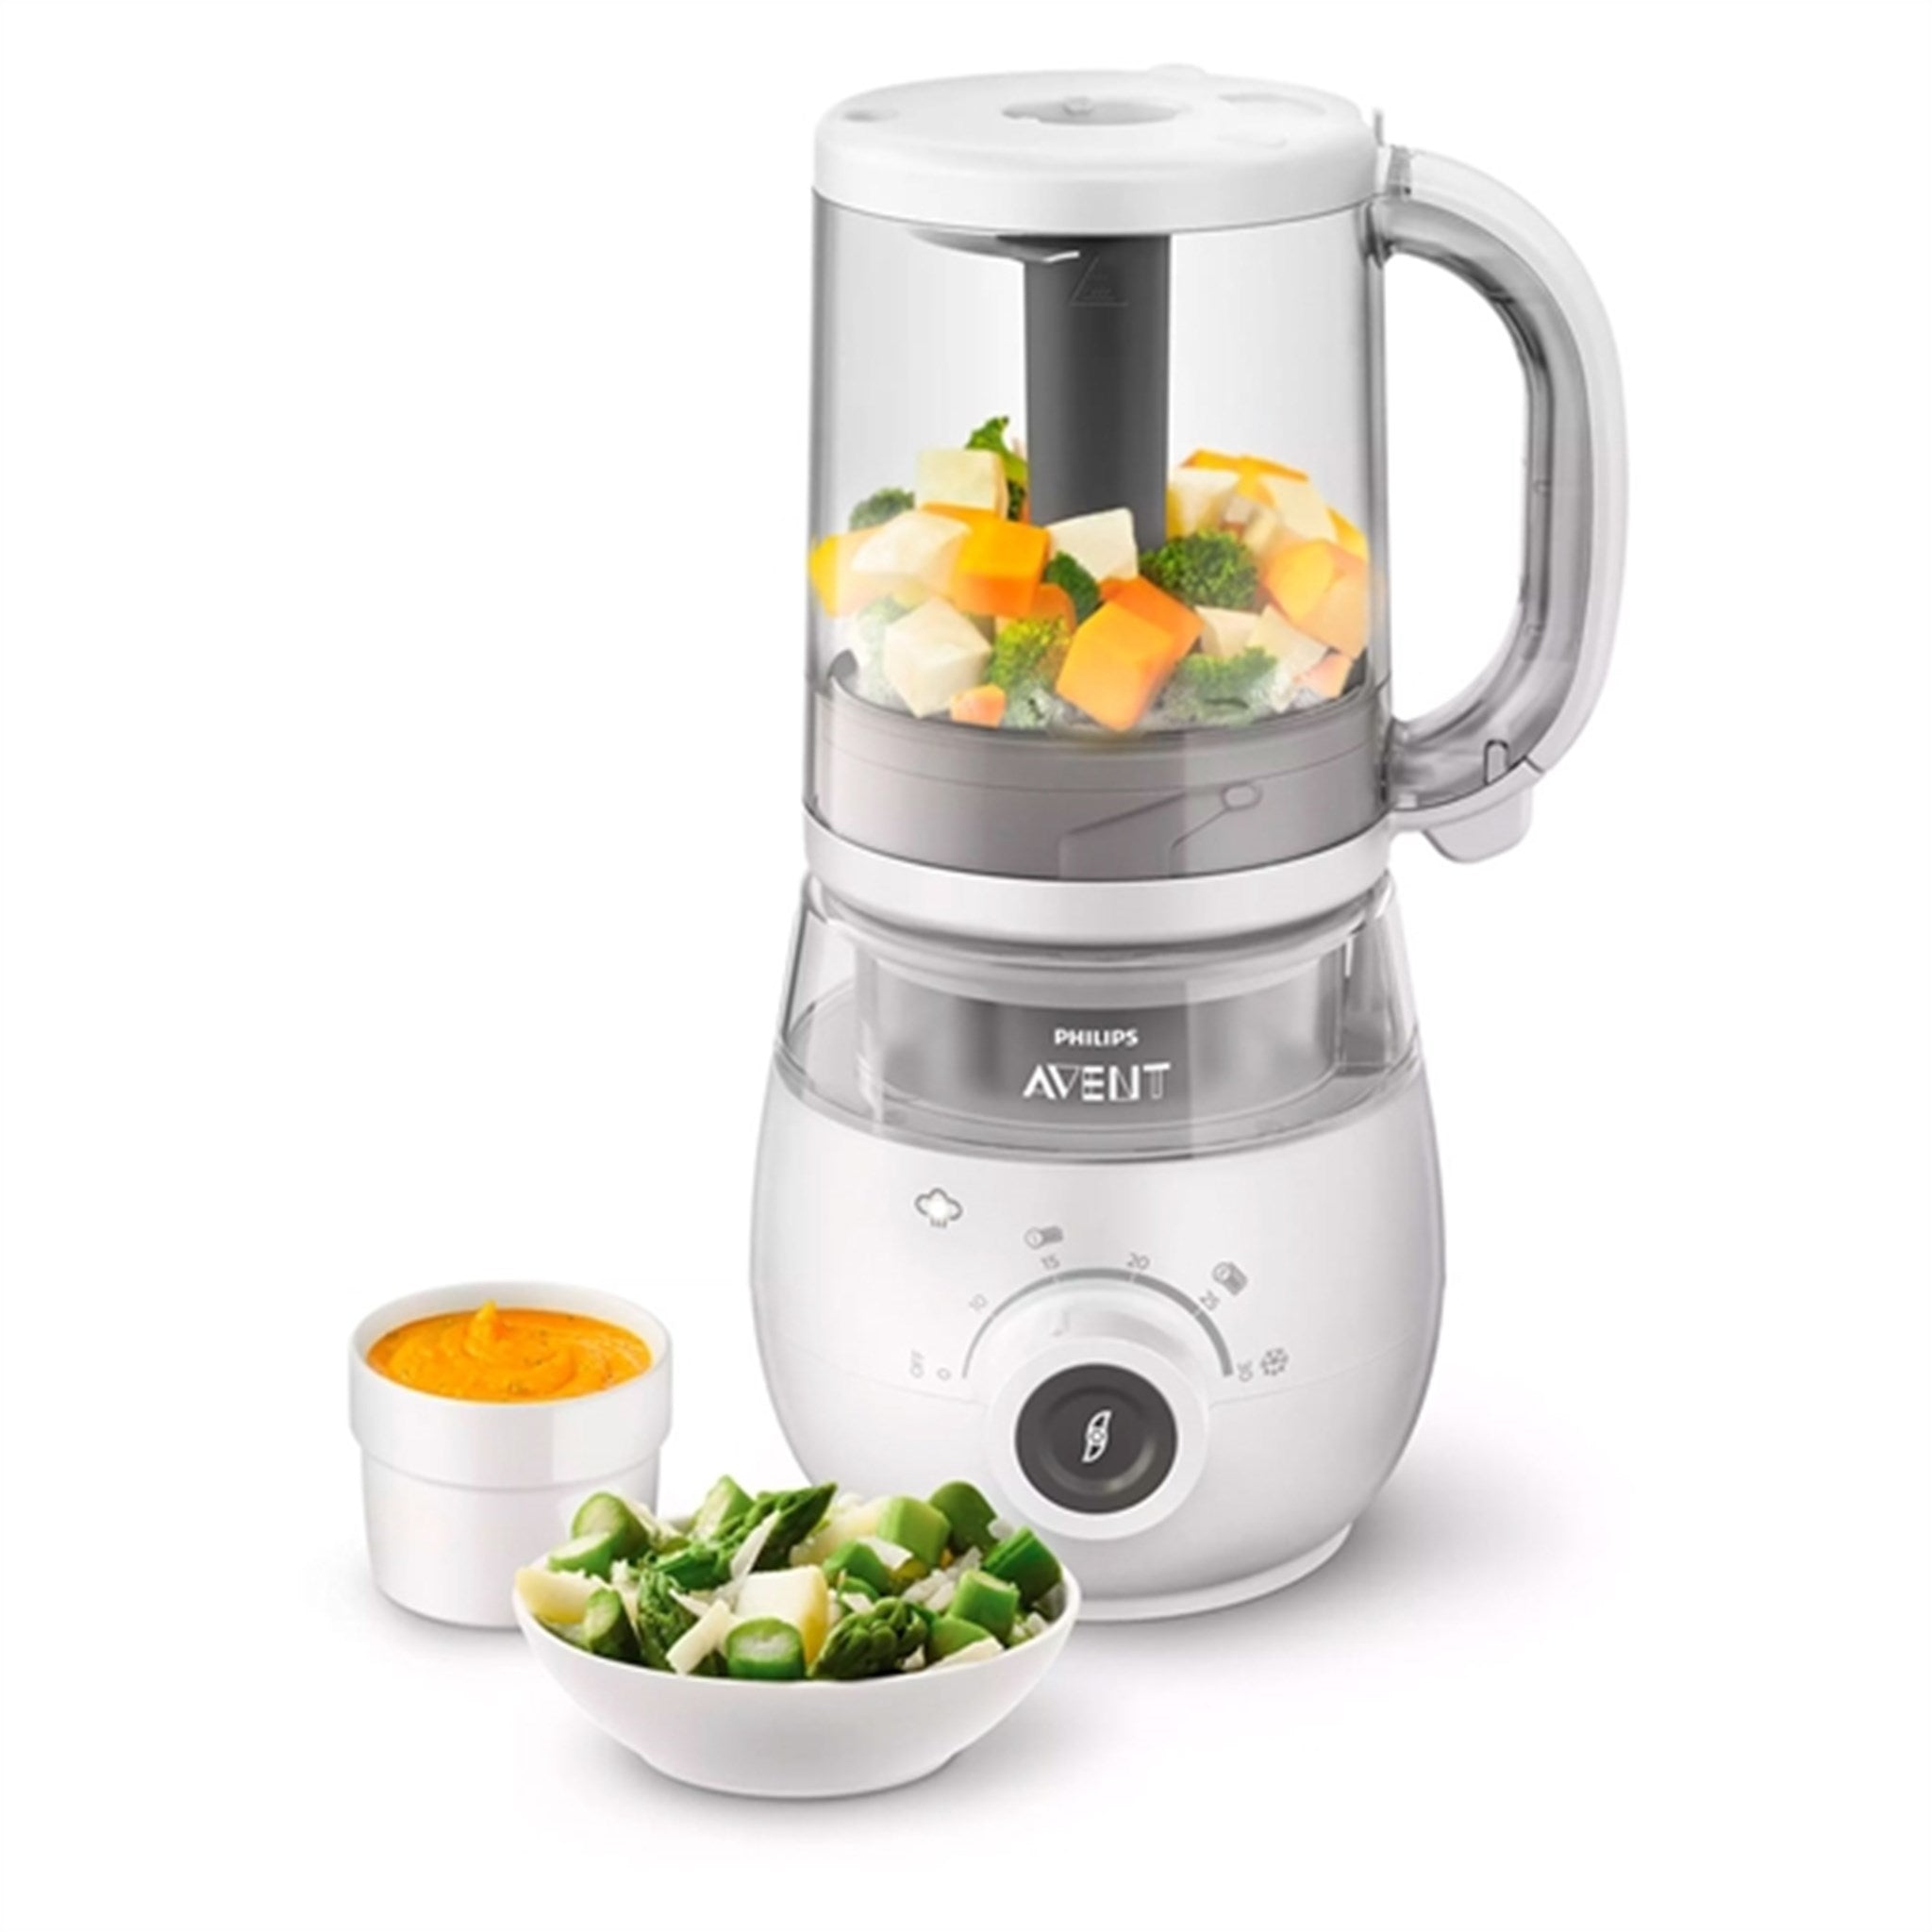 Philips Avent 4-in-1 Baby Food Processor For Healthy Food 3